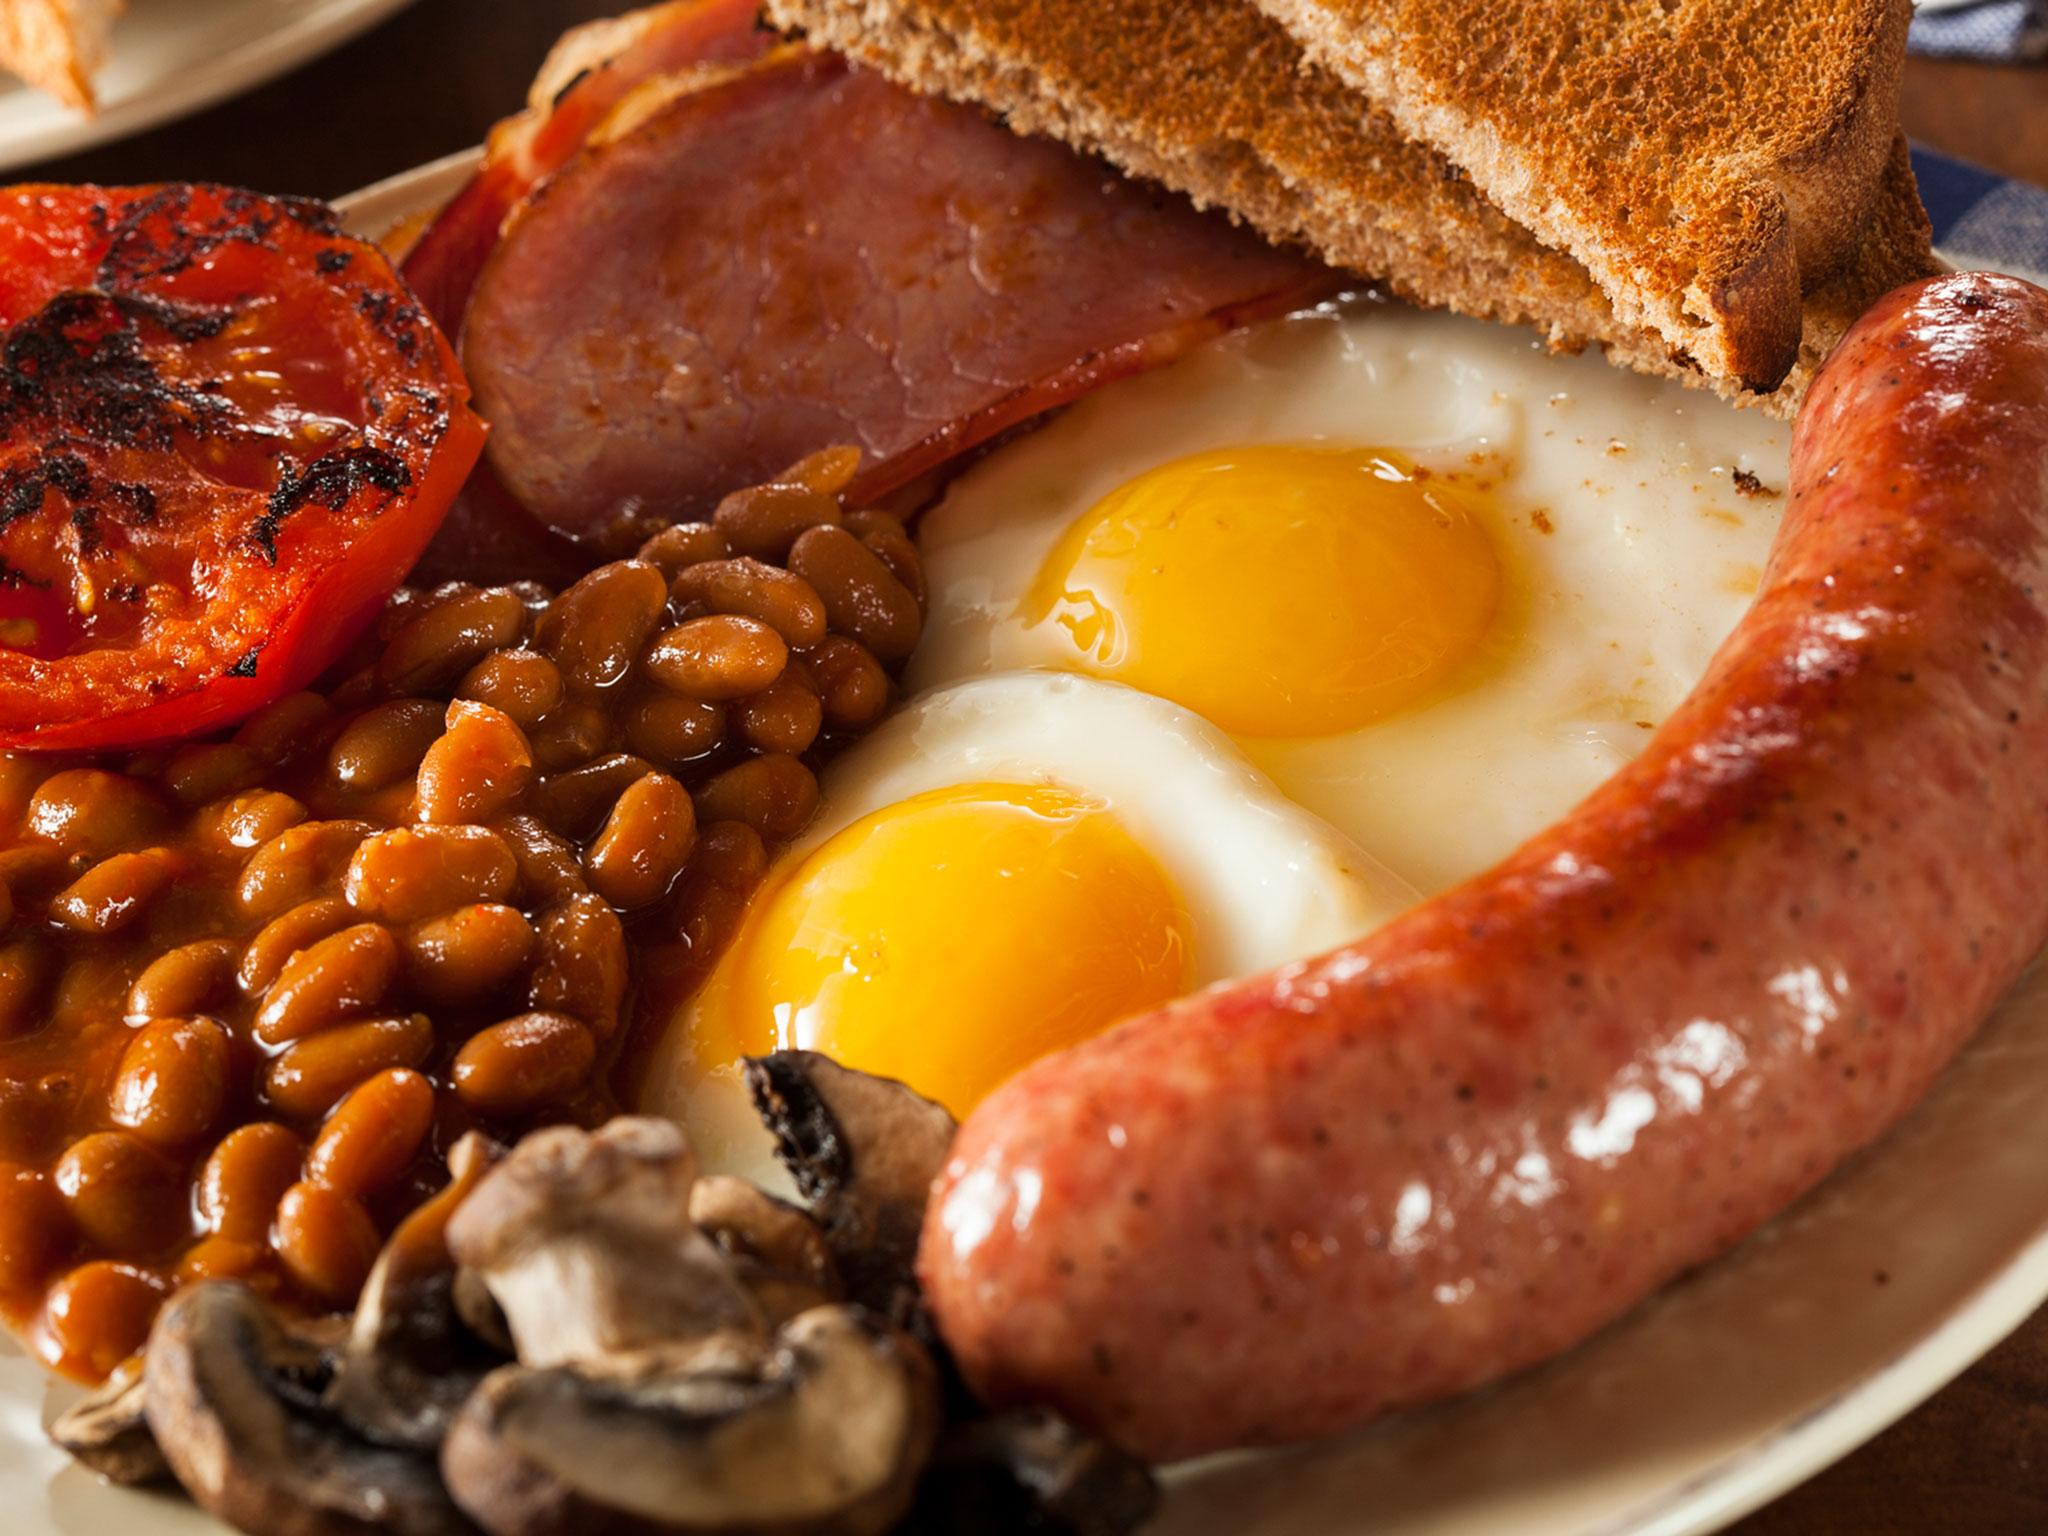 Brekking The Bank Cost Of Full English Breakfasts Soars Up To £25